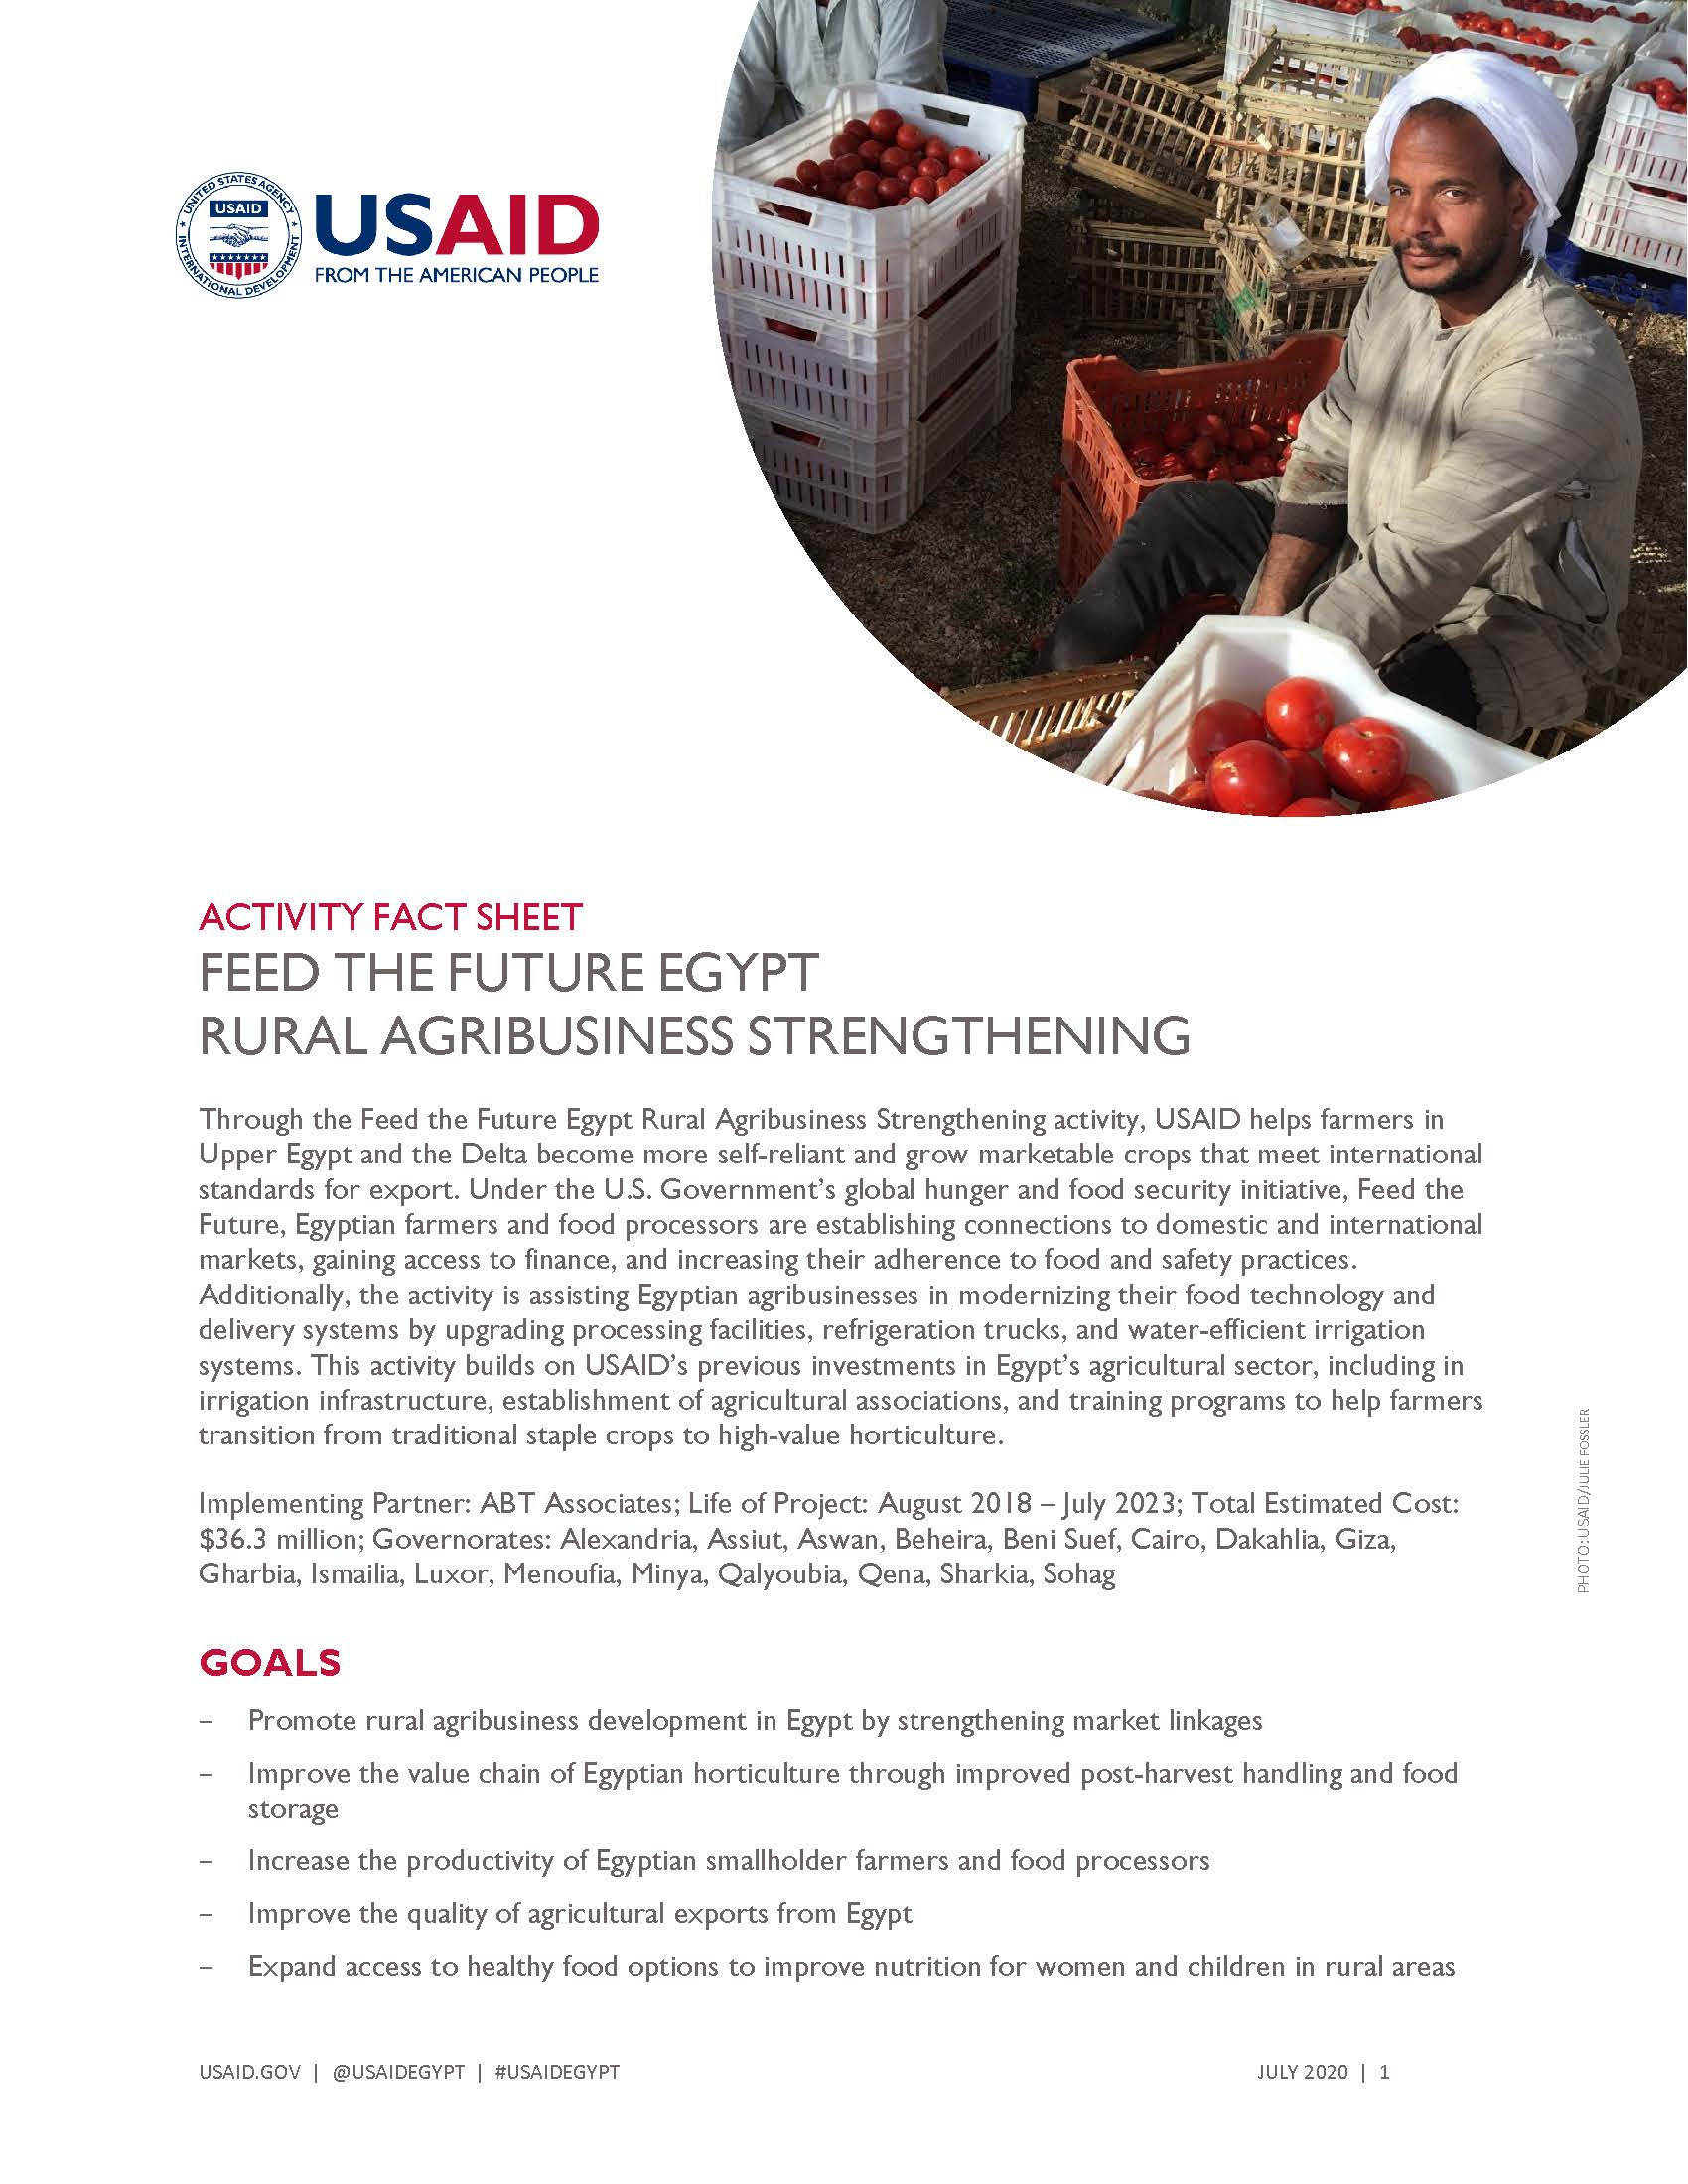 USAID/Egypt Activity Fact Sheet: Feed the Future Egypt Rural Agribusiness Strengthening